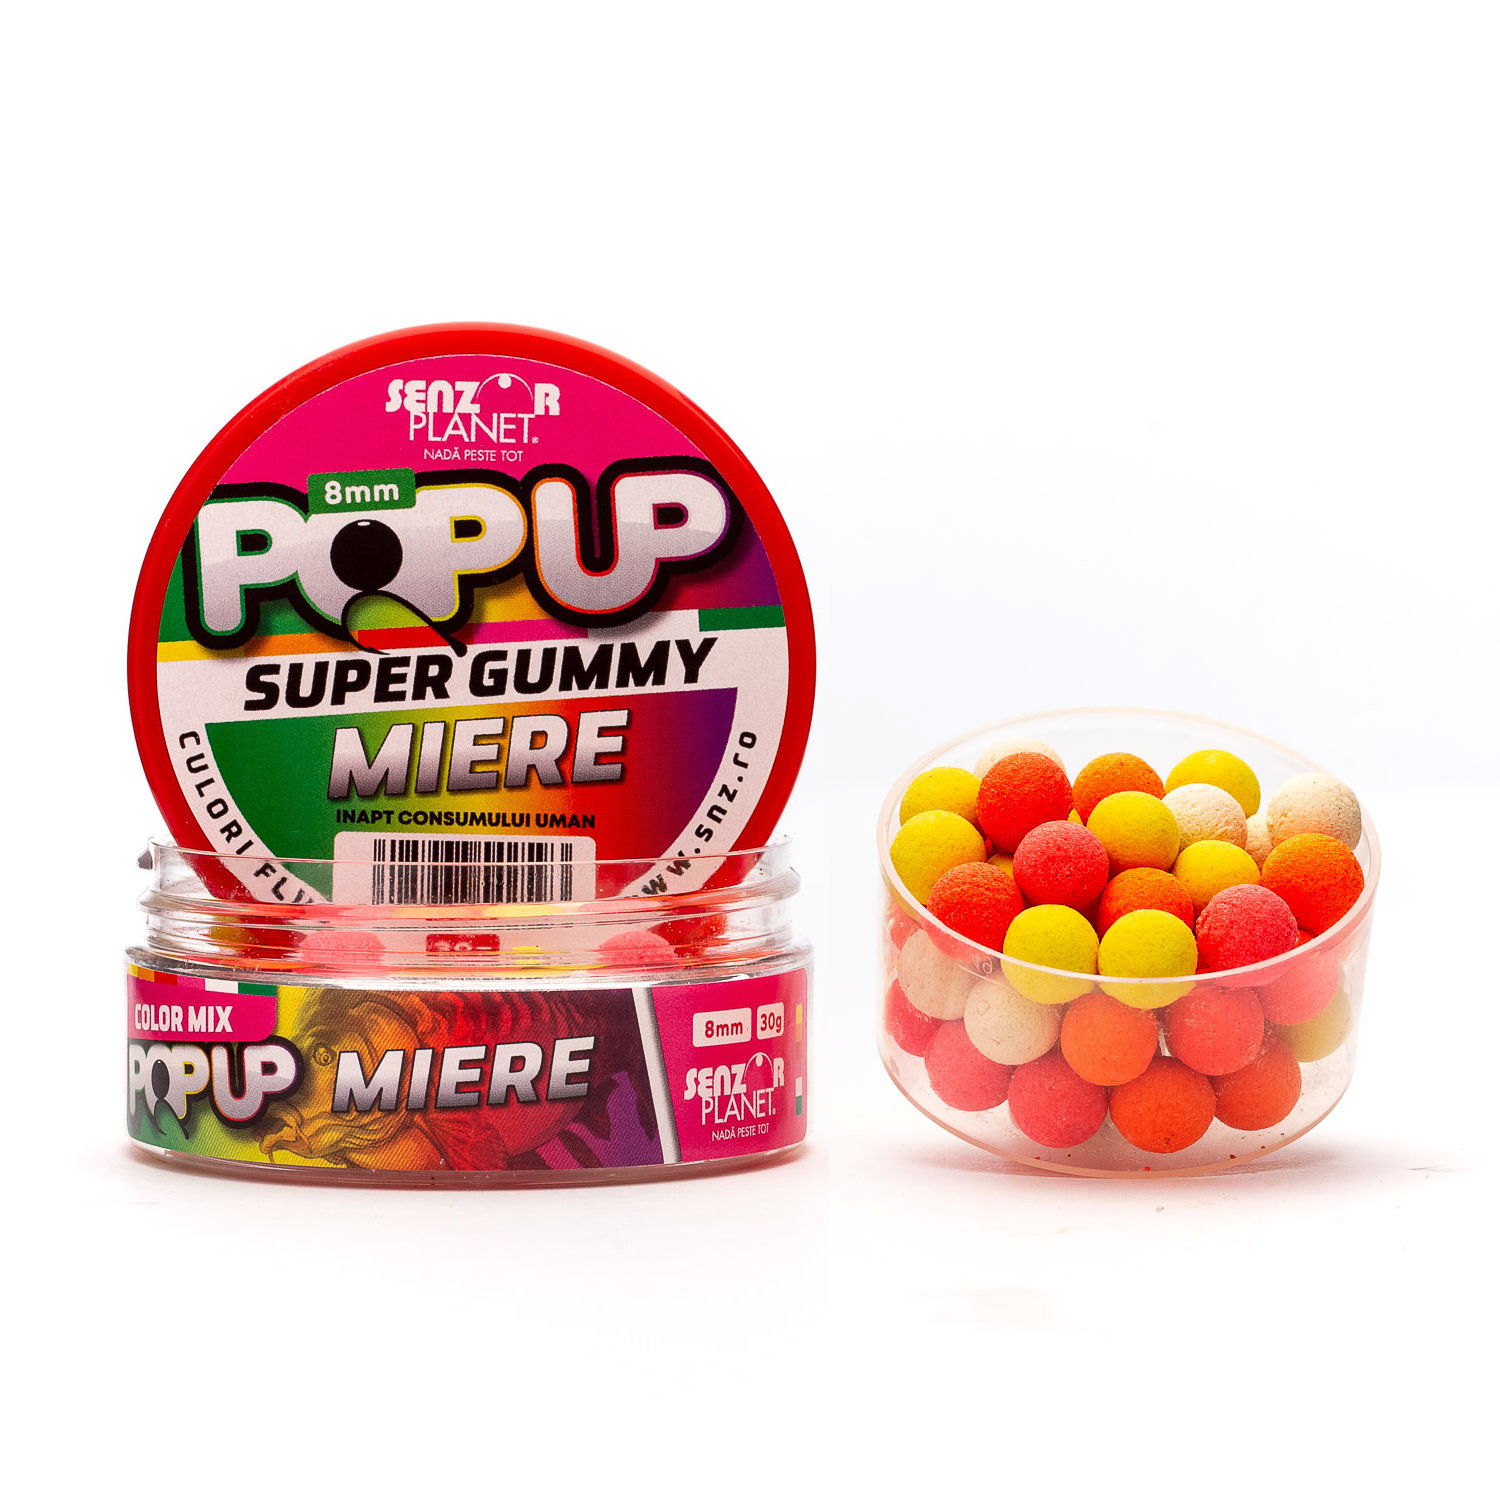 POP-UP MIERE 8mm 30g